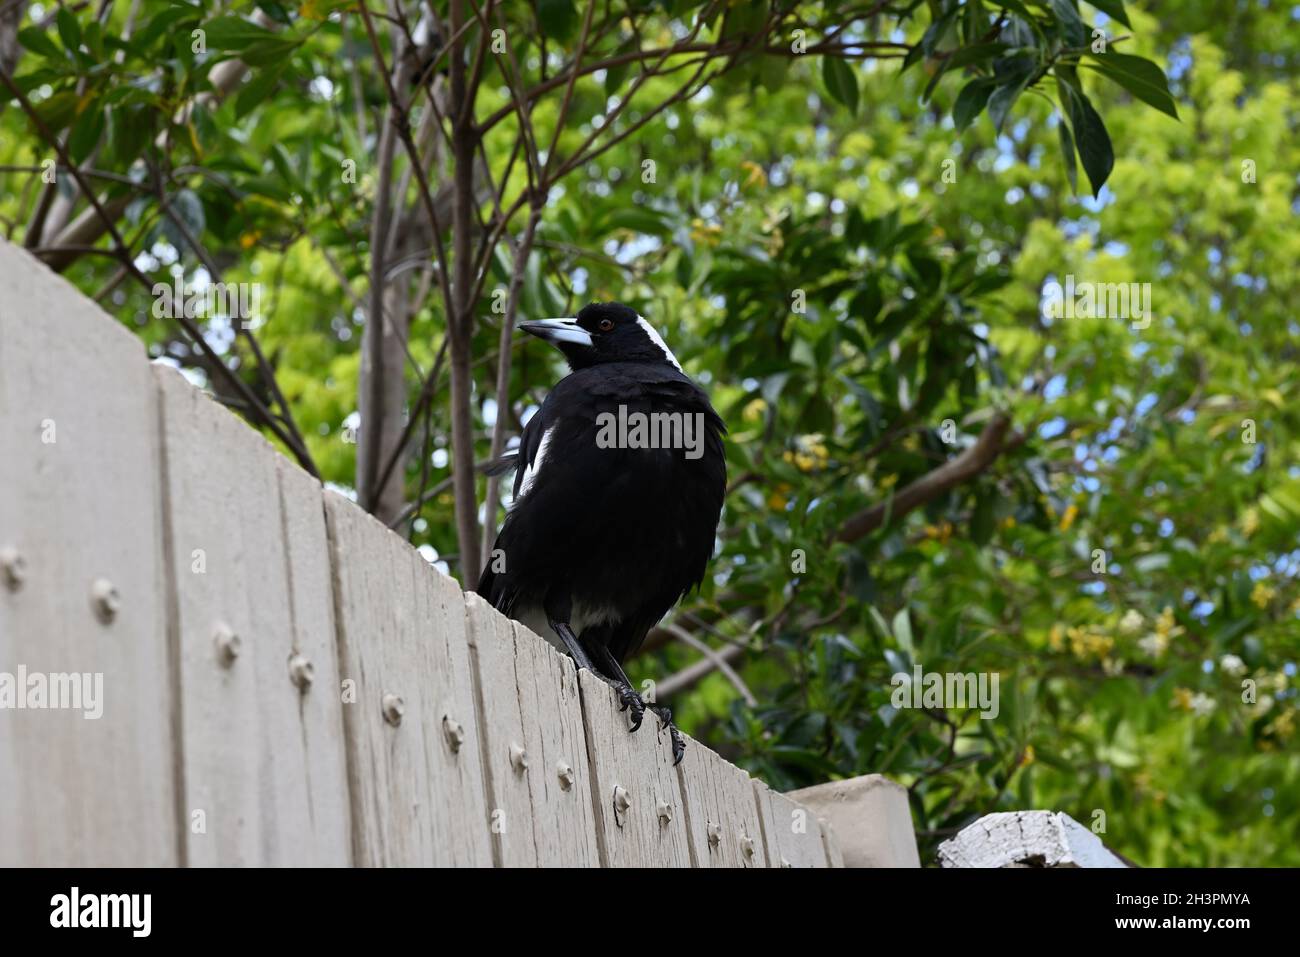 Australian magpie on a white wooden fence, looking to the left, the bird's feathery chest puffed out Stock Photo